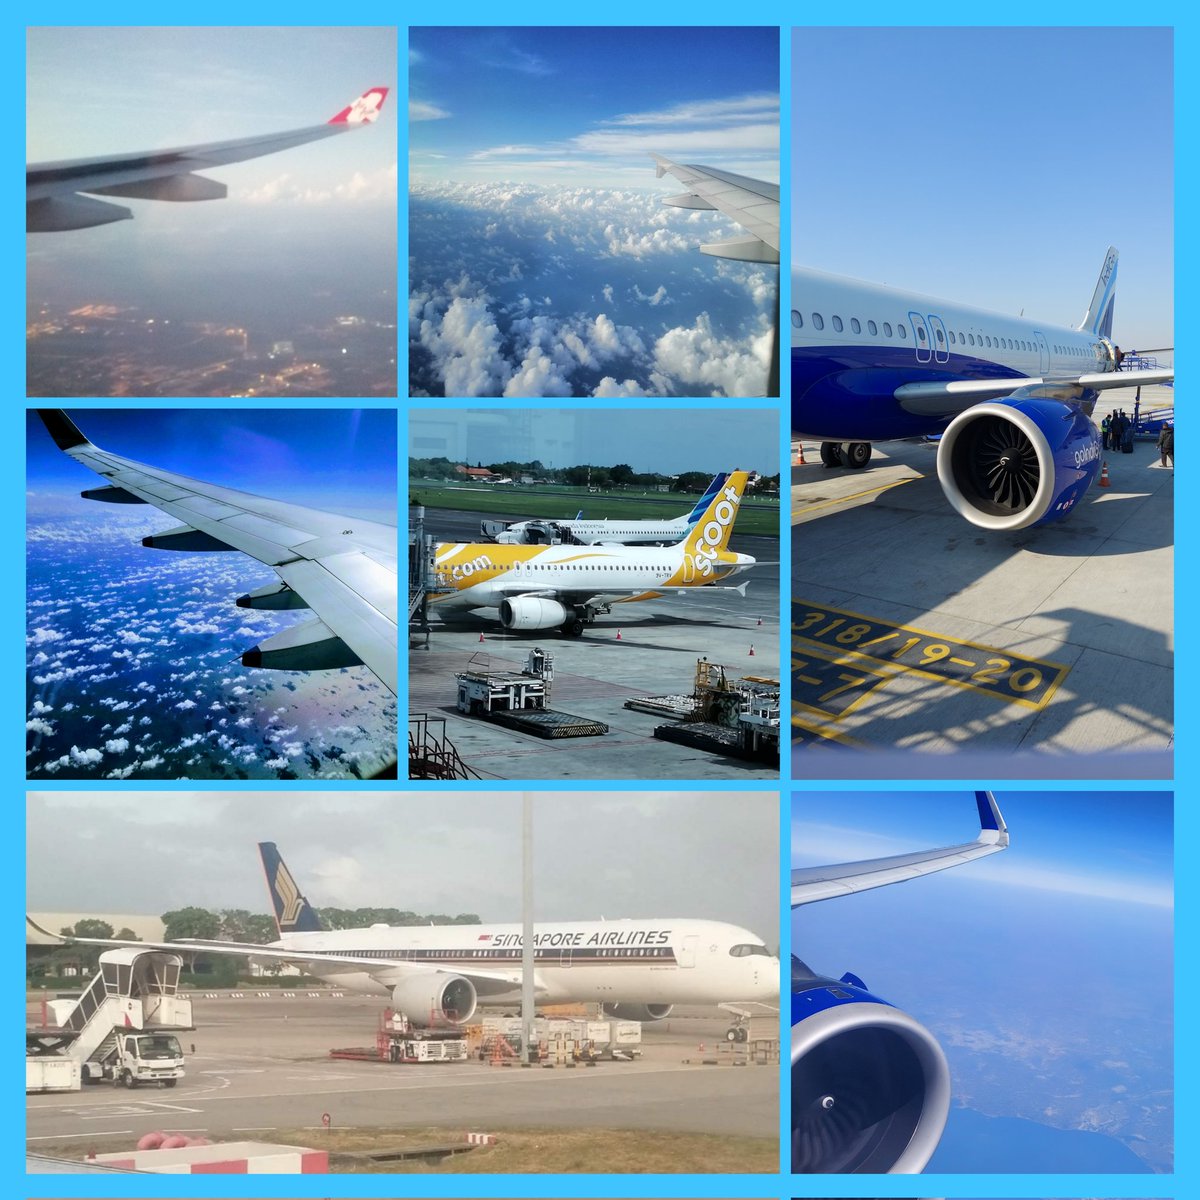 Wishing every #AvGeek and anyone who loves to fly a very happy International Civil Aviation Day! The boundaries of the world seem shorter now only because of the magic of aviation! I regard aviation as one of the greatest gifts to mankind!#aviation #InternationalCivilAviationDay